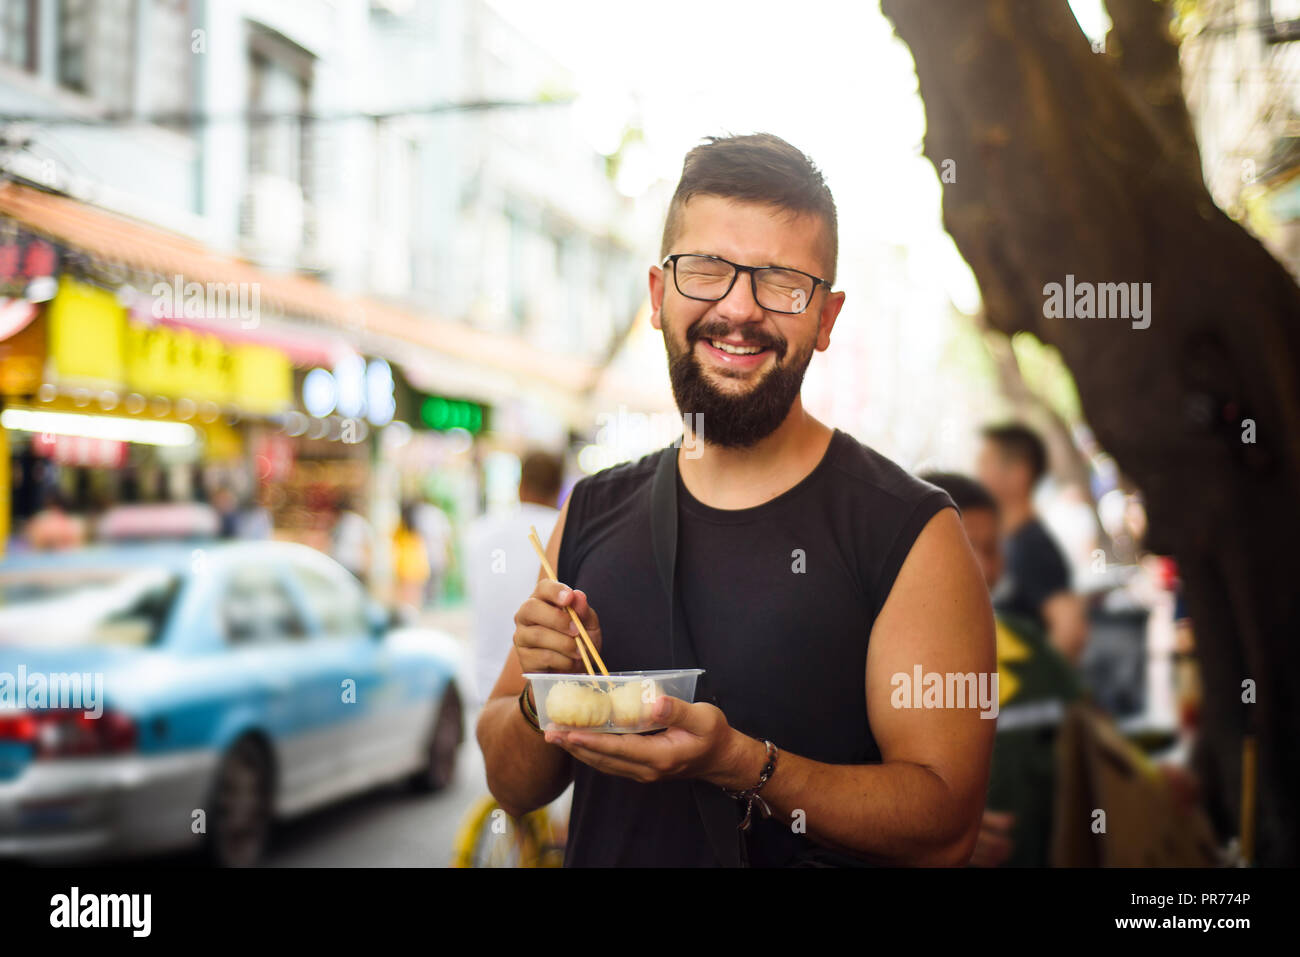 Foreigner eating baozi on the street in China Stock Photo